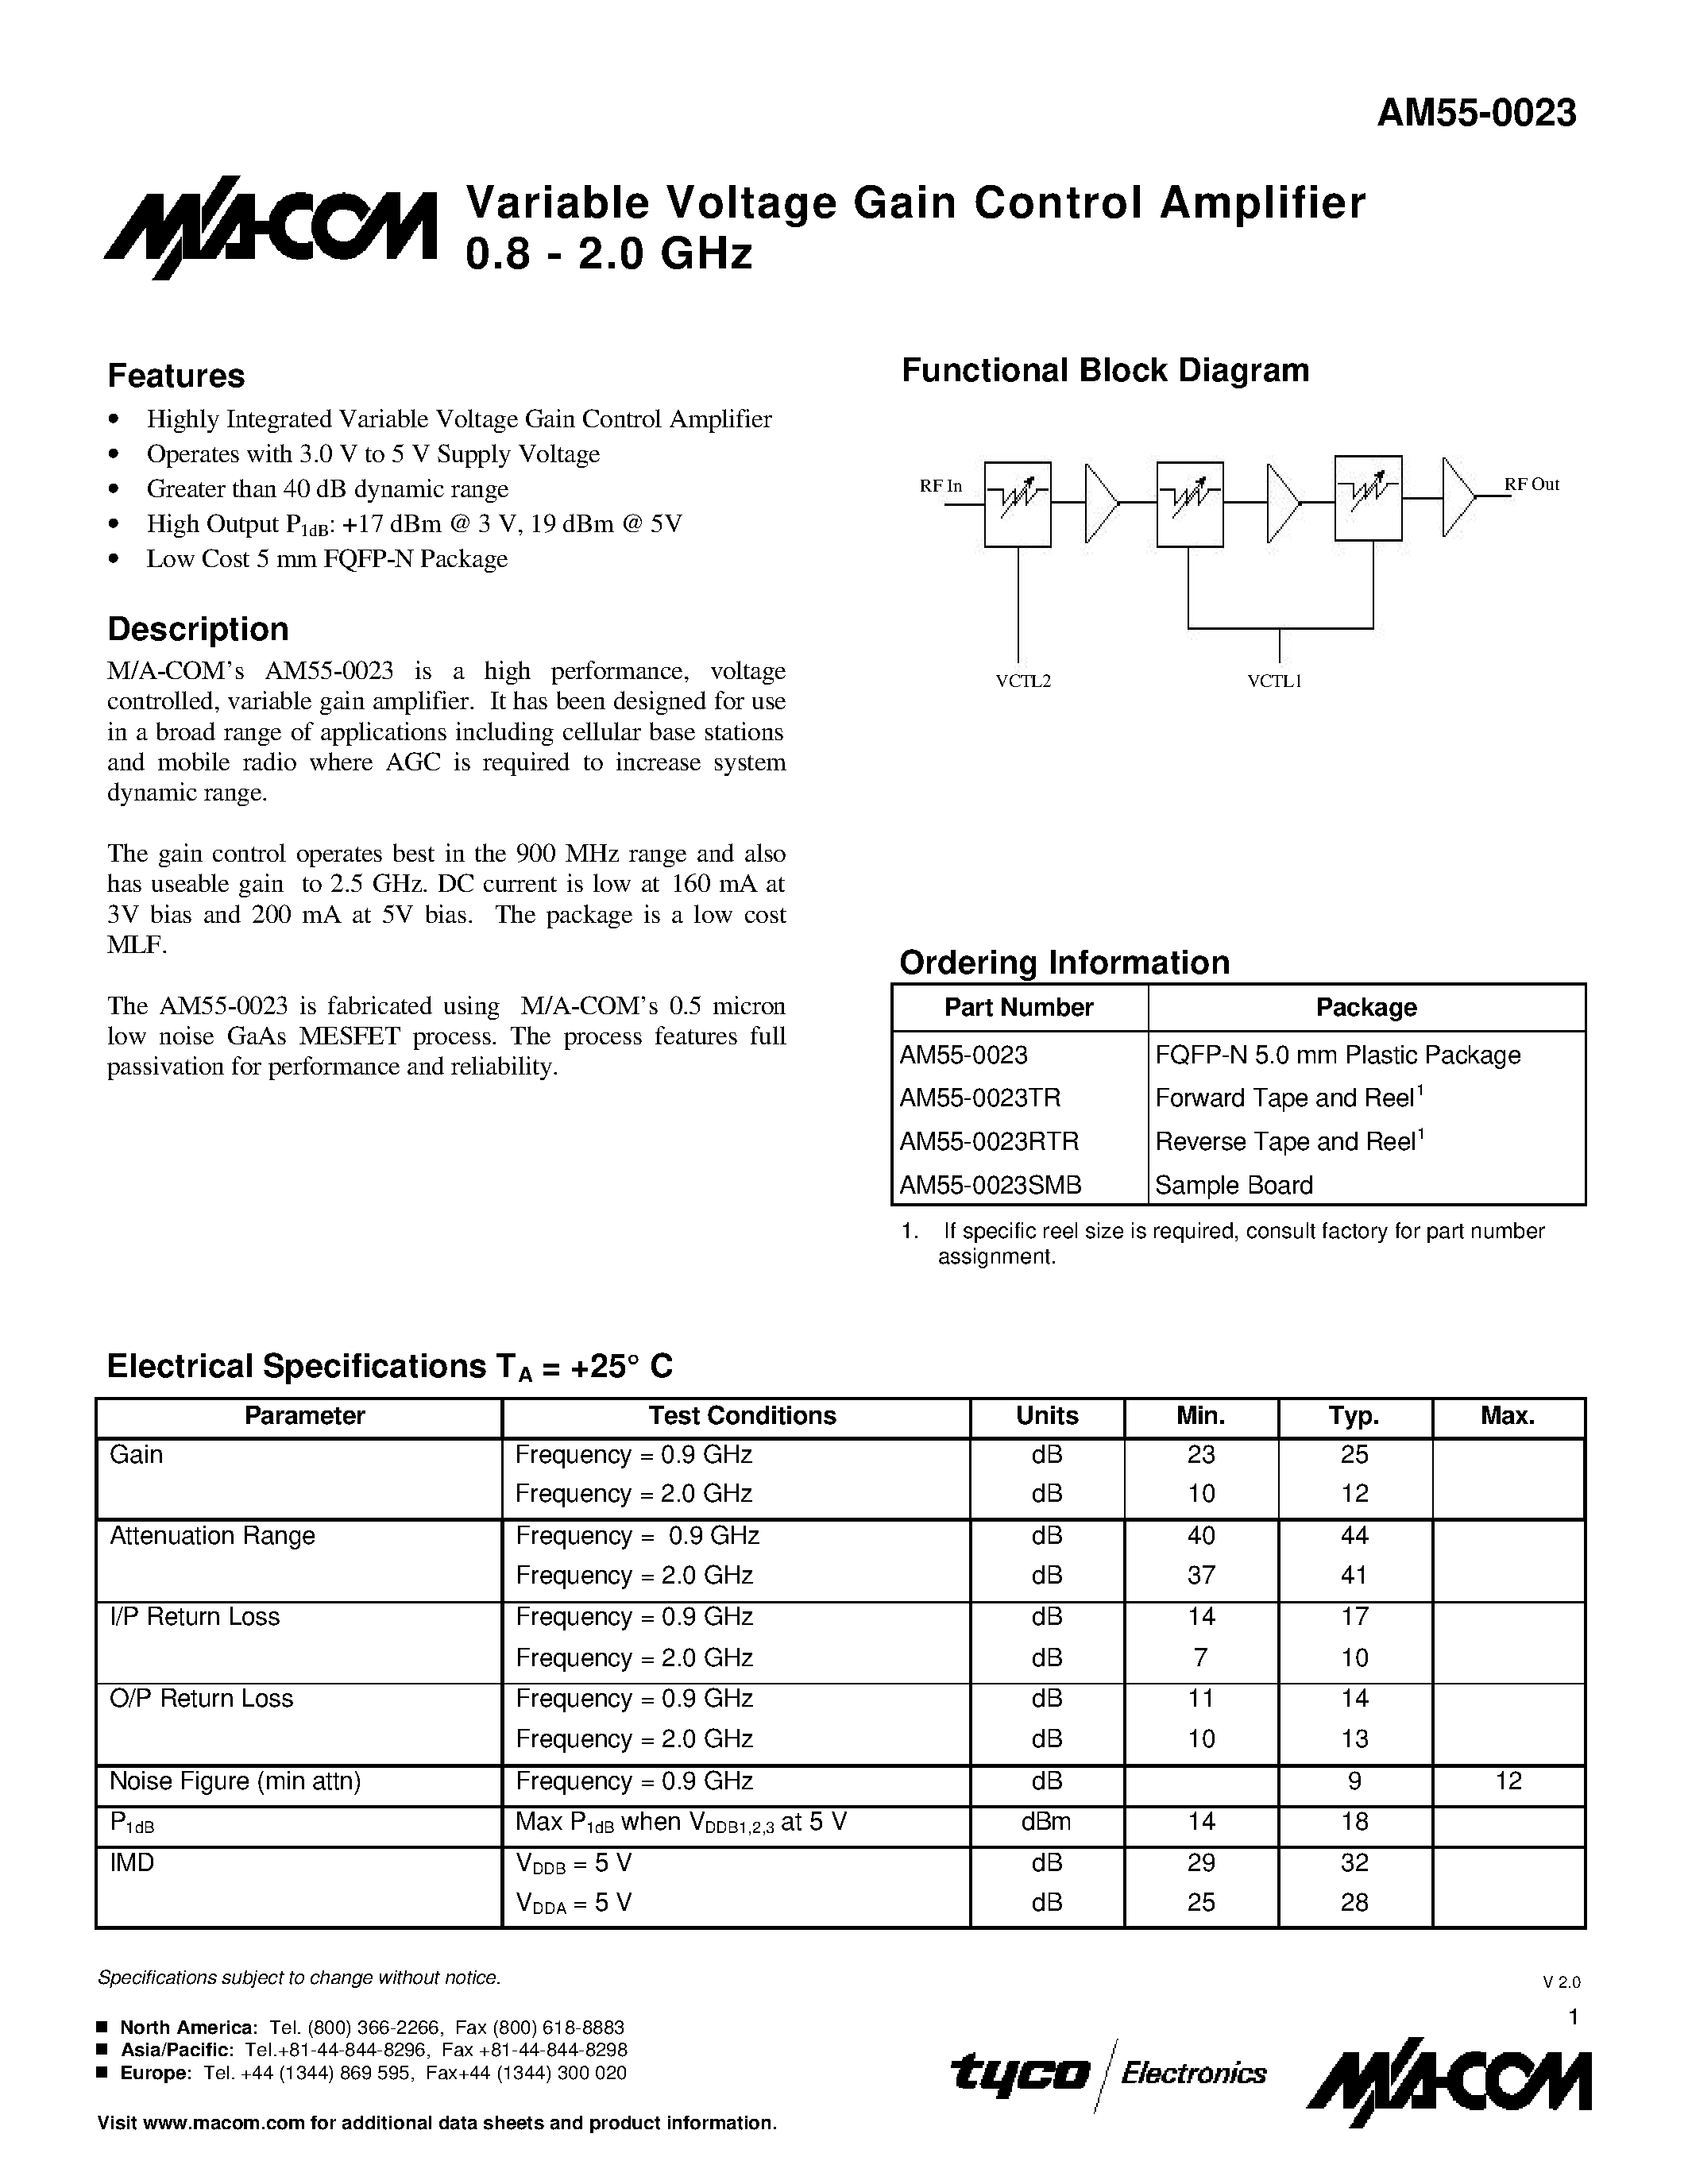 Datasheet AM55-0023RTR - Variable Voltage Gain Control Amplifier 0.8 - 2.0 GHz page 1